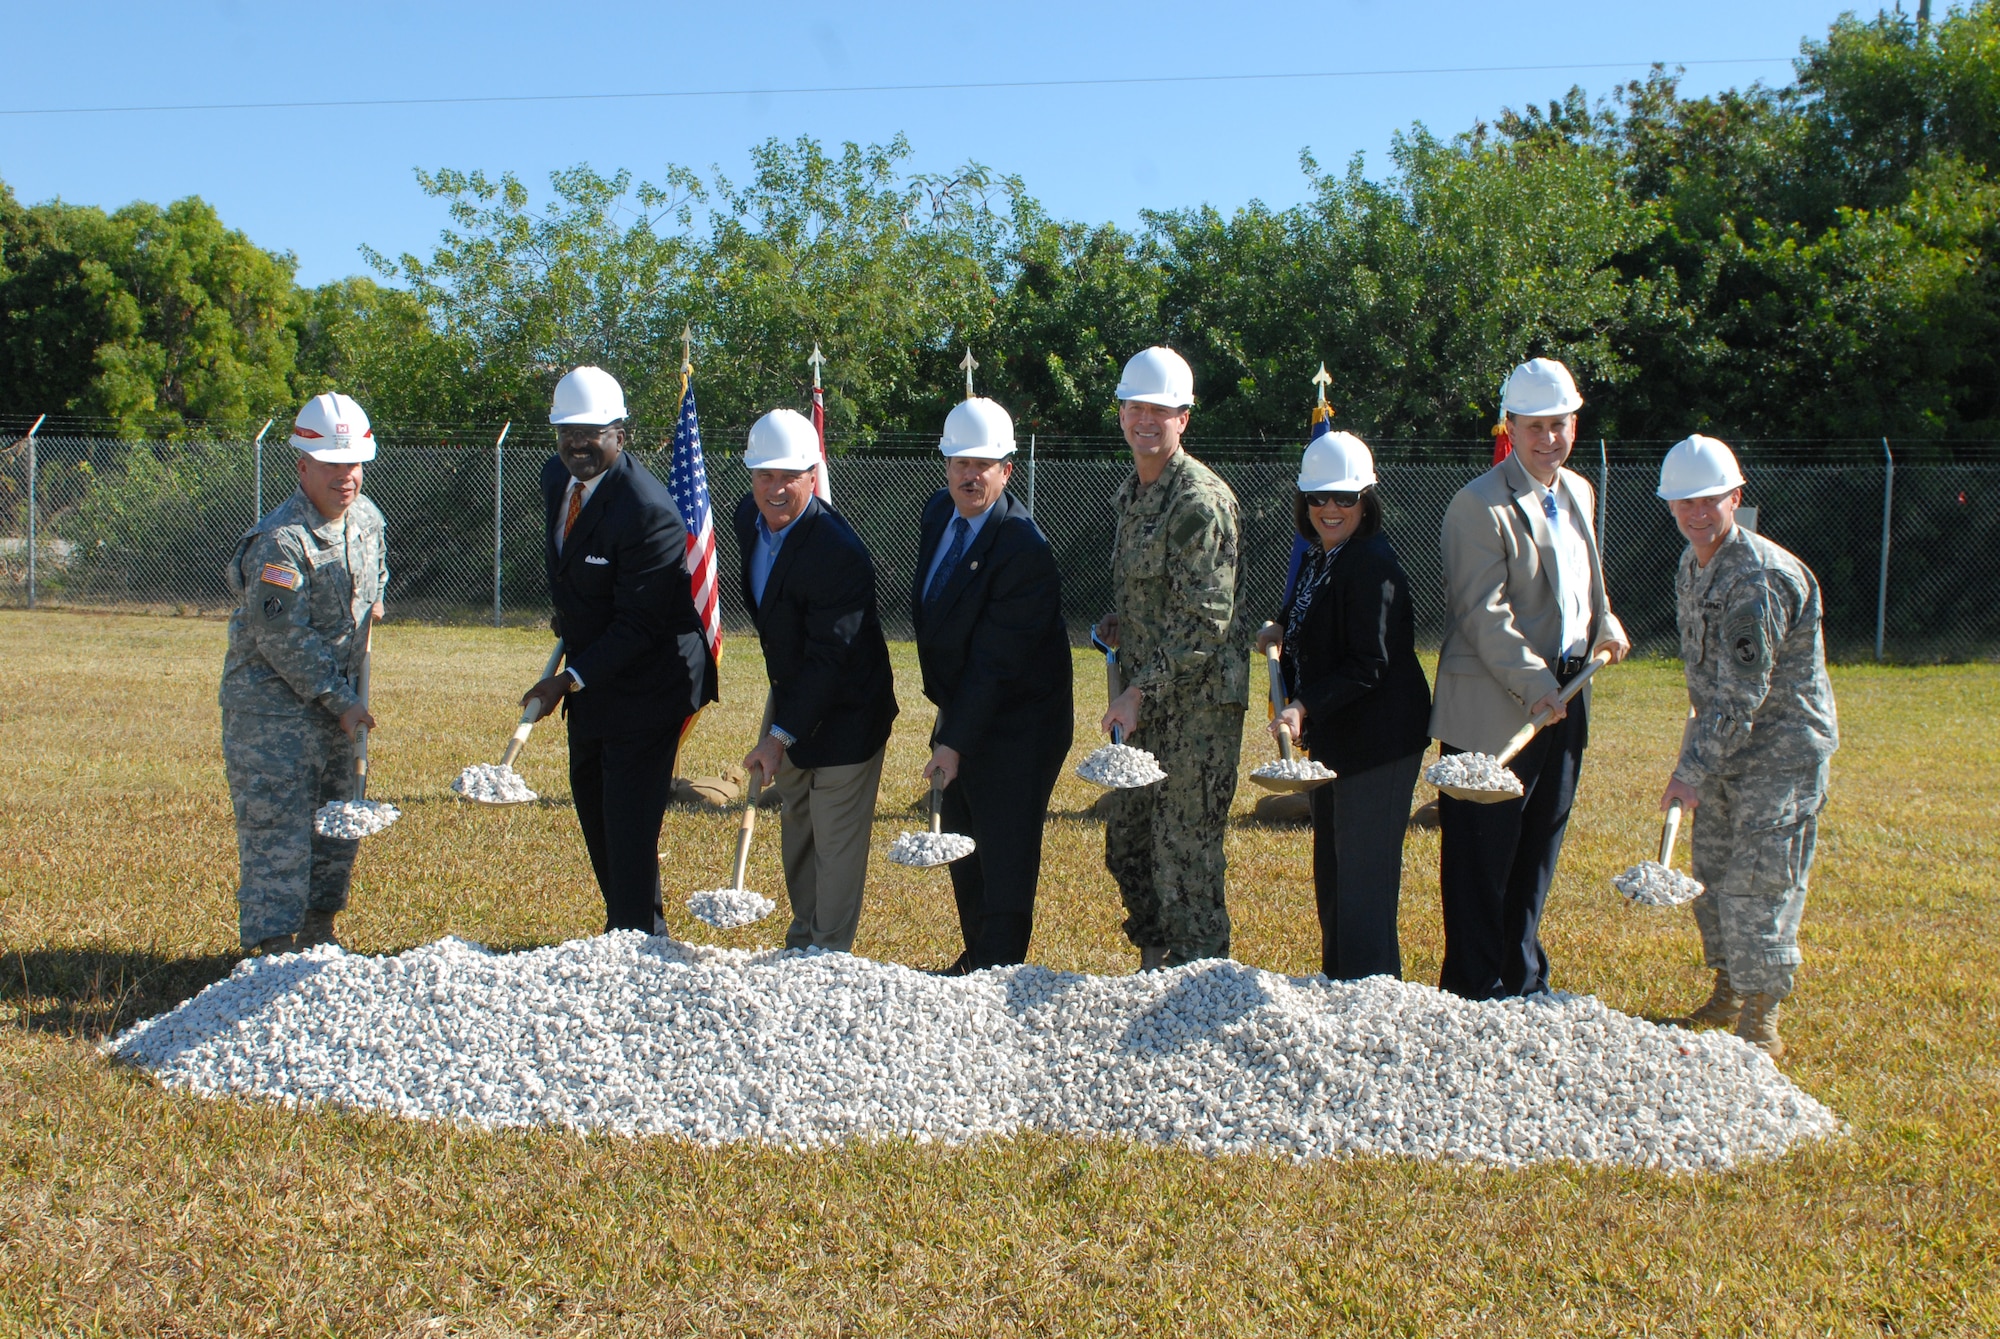 (Far Left) Maj. Gen. Todd T. Semonite, Commander of the U.S. Army Corps of Engineers South Atlantic Division, Miami-Dade County commissioners, Homestead Mayor Steve Bateman, joined Navy Rear Adm. Thomas L. Brown II (center), the commander of Special Operations Command South, and Command Sgt. Maj. Donald White (far right), SOCSOUTH Senior enlisted advisor, pose as they formally welcome the beginning of construction for the new SOCSOUTH Headquarters Building, Jan 10 at Homestead Air Reserve Base, Fla. The new 125,000-square foot, $41 million headquarters facility will be designed to host more than 400 people representing all branches of the armed forces. The new facility will be LEED-certified and is expected to be completed in three years. (Department of Defense photo by Army Sgt. 1st Class Alex Licea, SOCSOUTH Public Affairs)